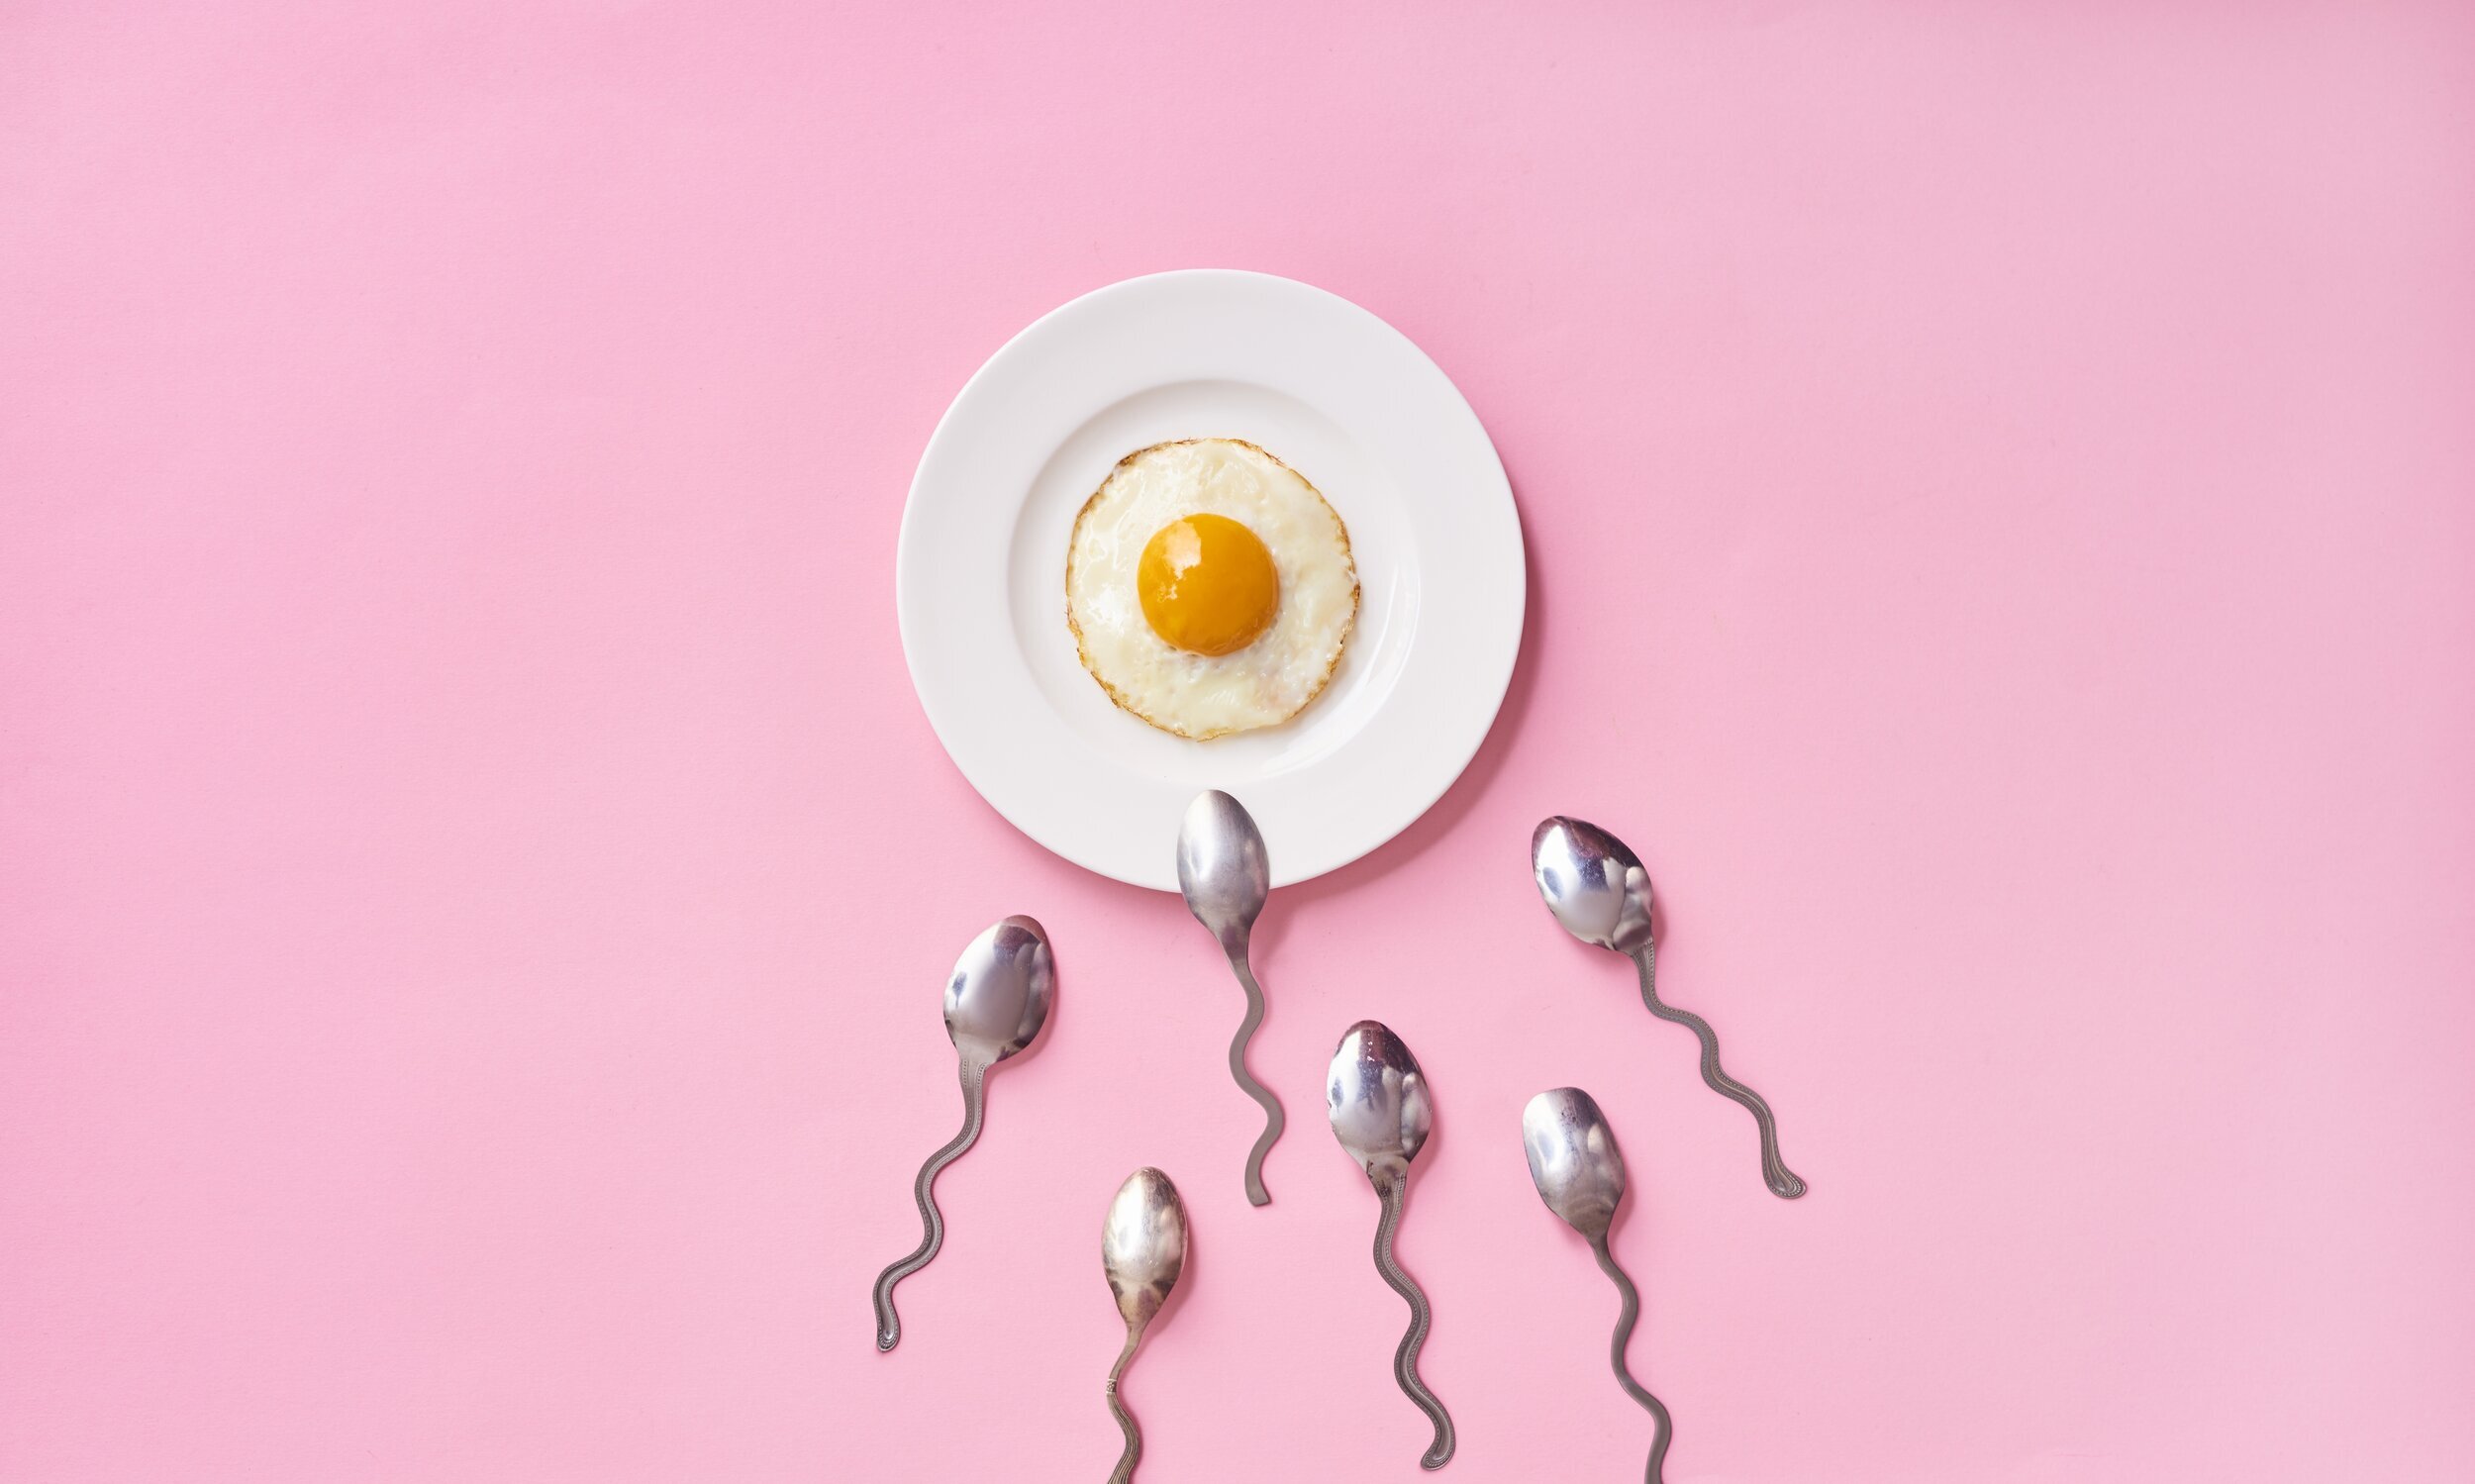 egg on a plate with sperm-shaped spoons perched on the plate